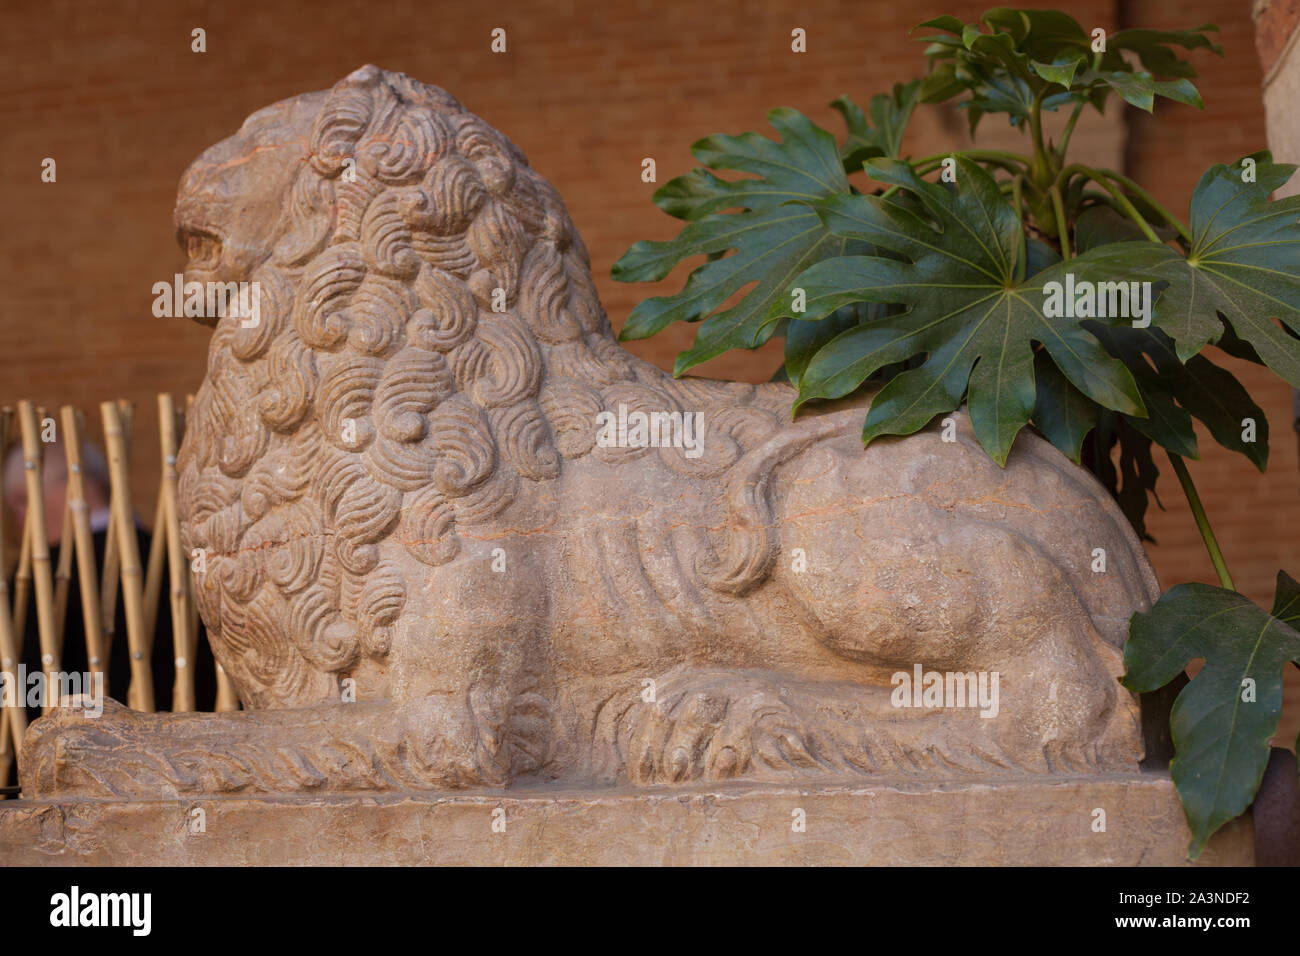 Sculpture of a lion at the entrance of the Bemberg Foundation art gallery housed in the Renaissance Hotel d'Assézat, Toulouse, France Stock Photo